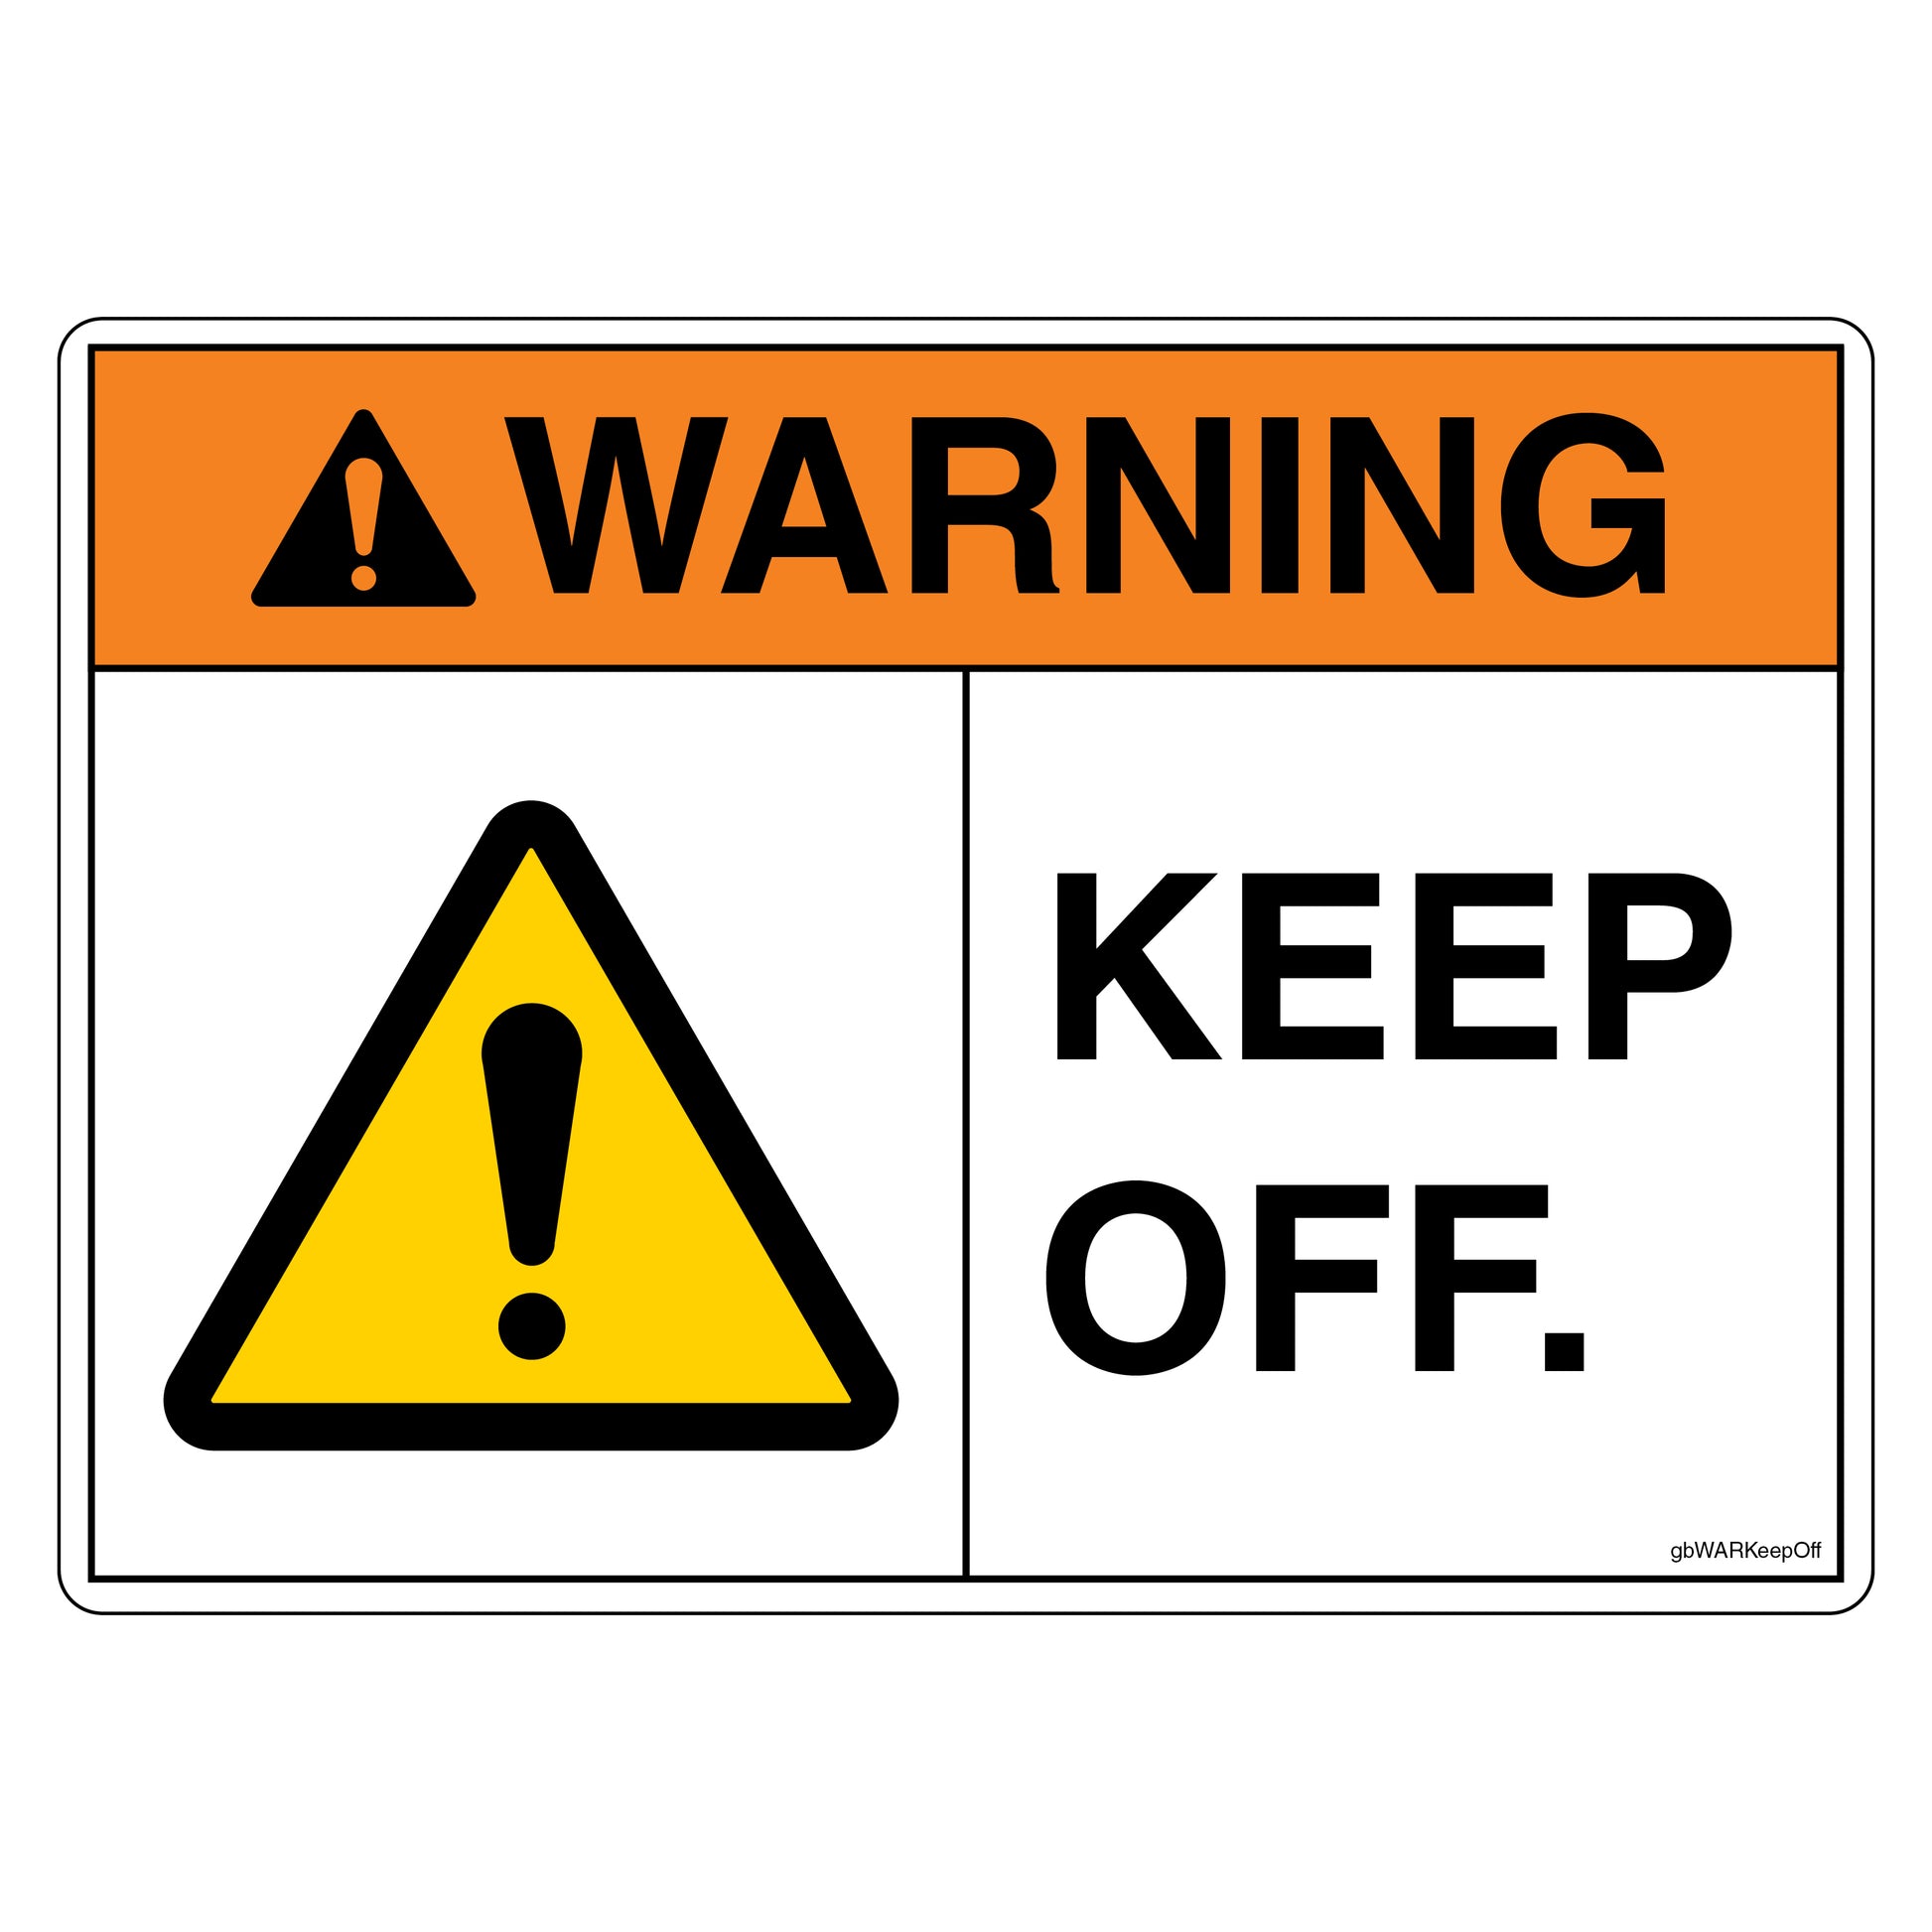 Warning Keep Off Decal. 4 inches by 3 inches in size.